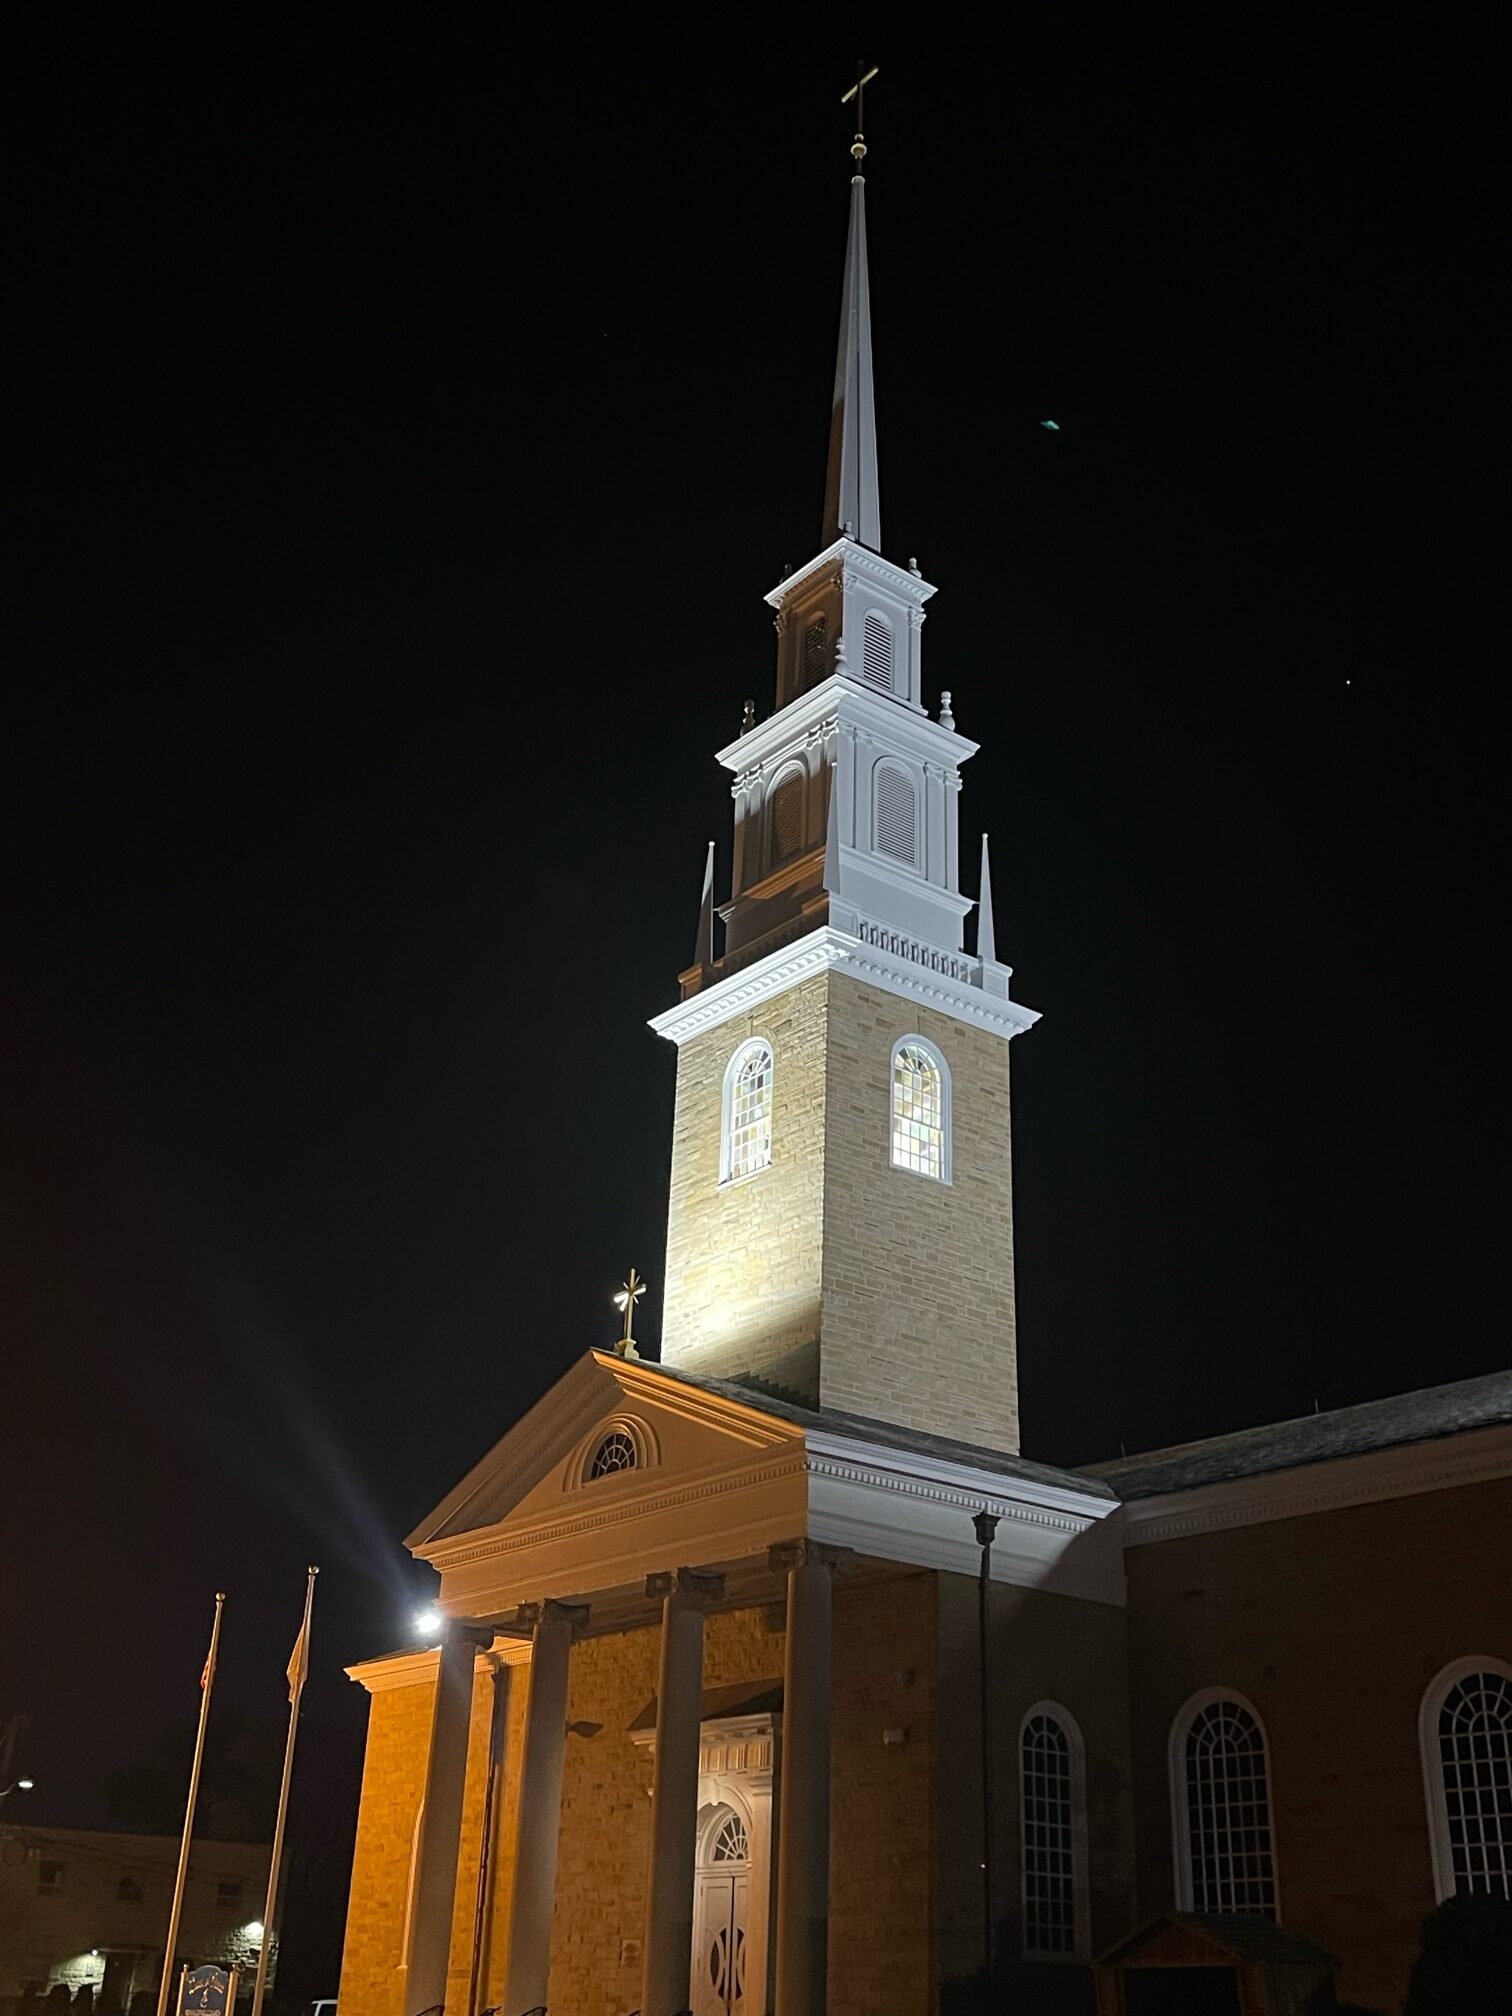 Queen of Peace Church’s newly refurbished steeple lit up the night sky during a rededication ceremony on November 26, 2022, the latest event in the North Arlington parish’s yearlong centennial anniversary celebration.